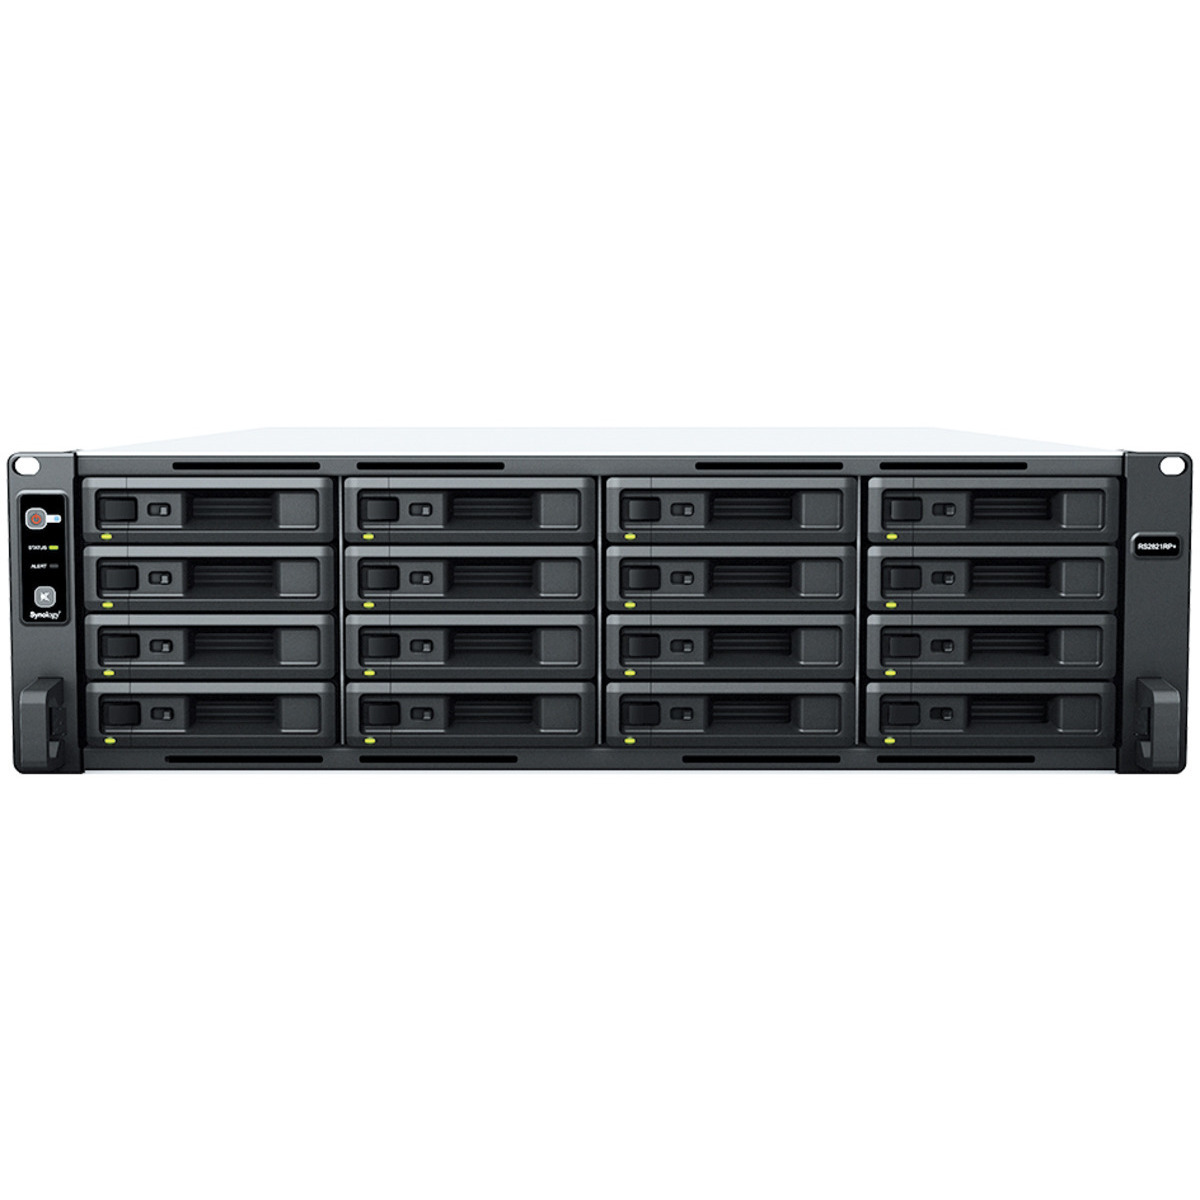 Synology RackStation RS2821RP+ 44tb 16-Bay RackMount Large Business / Enterprise NAS - Network Attached Storage Device 11x4tb Western Digital Red SA500 WDS400T1R0A 2.5 560/530MB/s SATA 6Gb/s SSD NAS Class Drives Installed - Burn-In Tested RackStation RS2821RP+